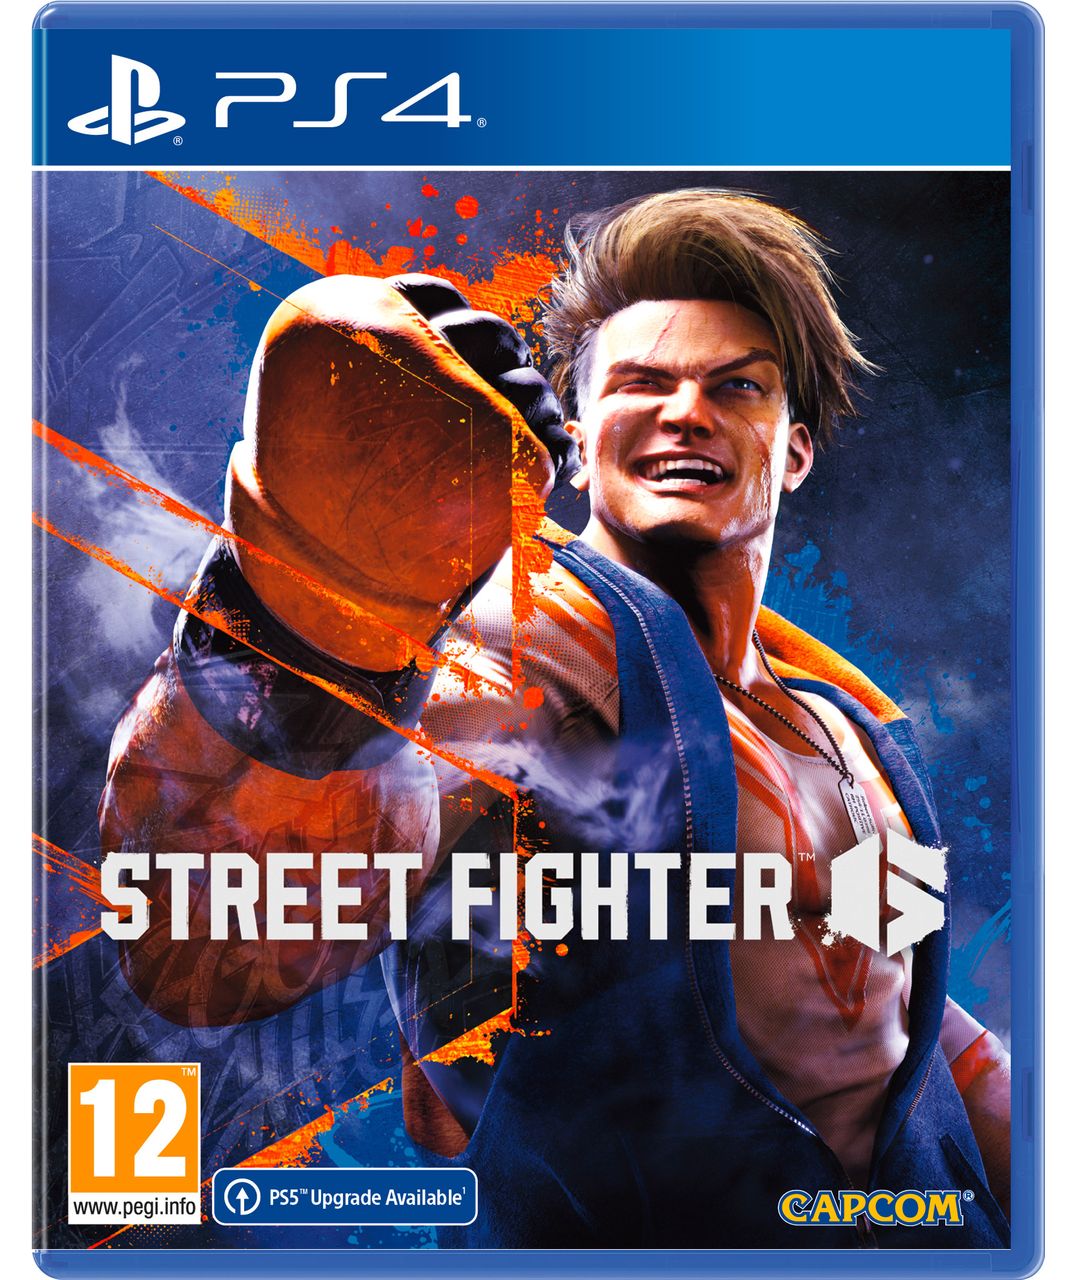 Buy Street Fighter™ 6 Steam Key, Instant Delivery